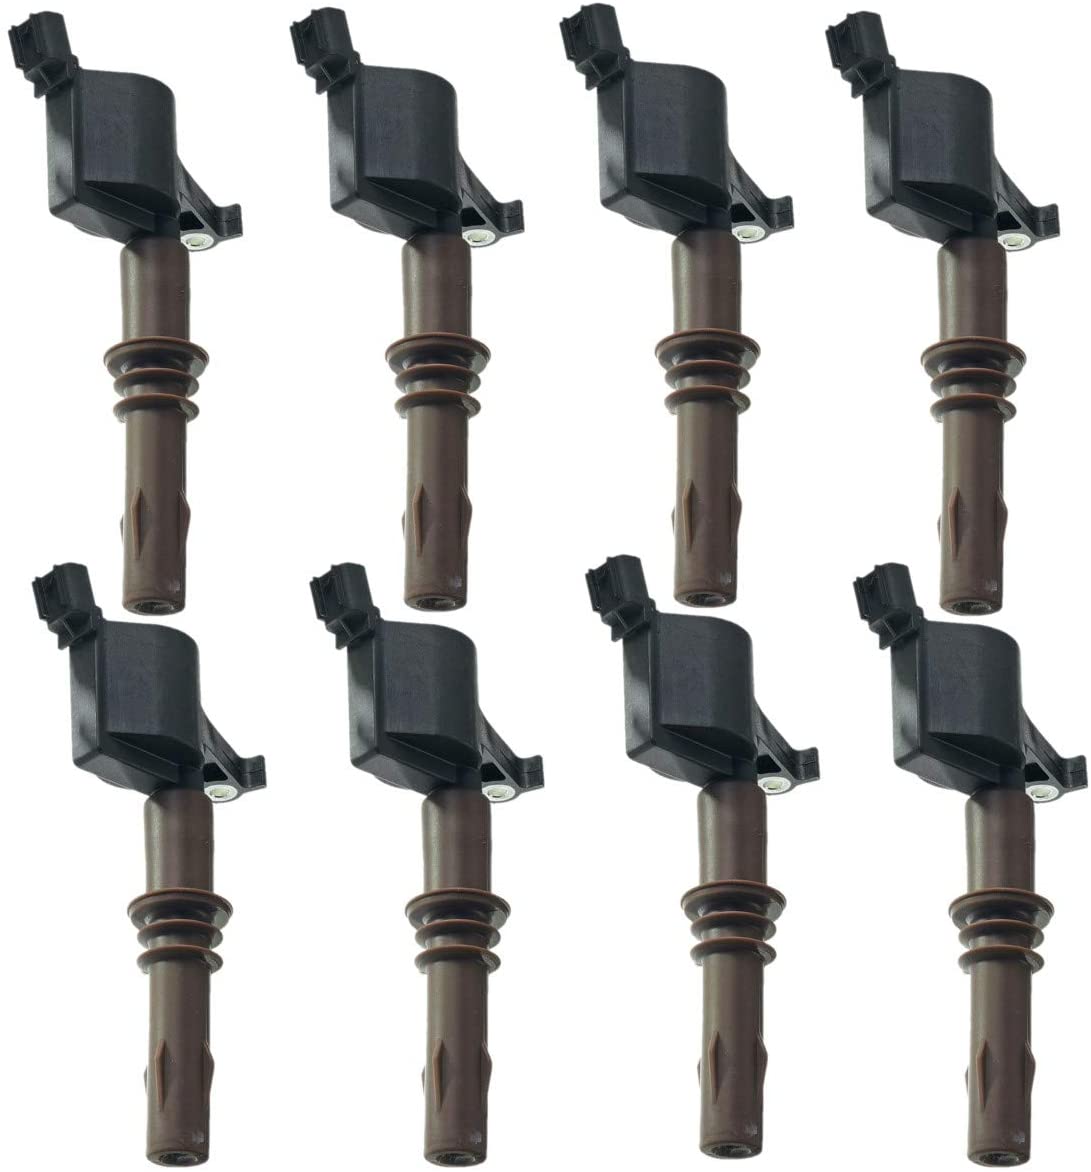 Set of 8 Ignition Coil Pack for Lincoln Navigator Mercury Mountaineer Ford Explorer Expedition Mustang F-150